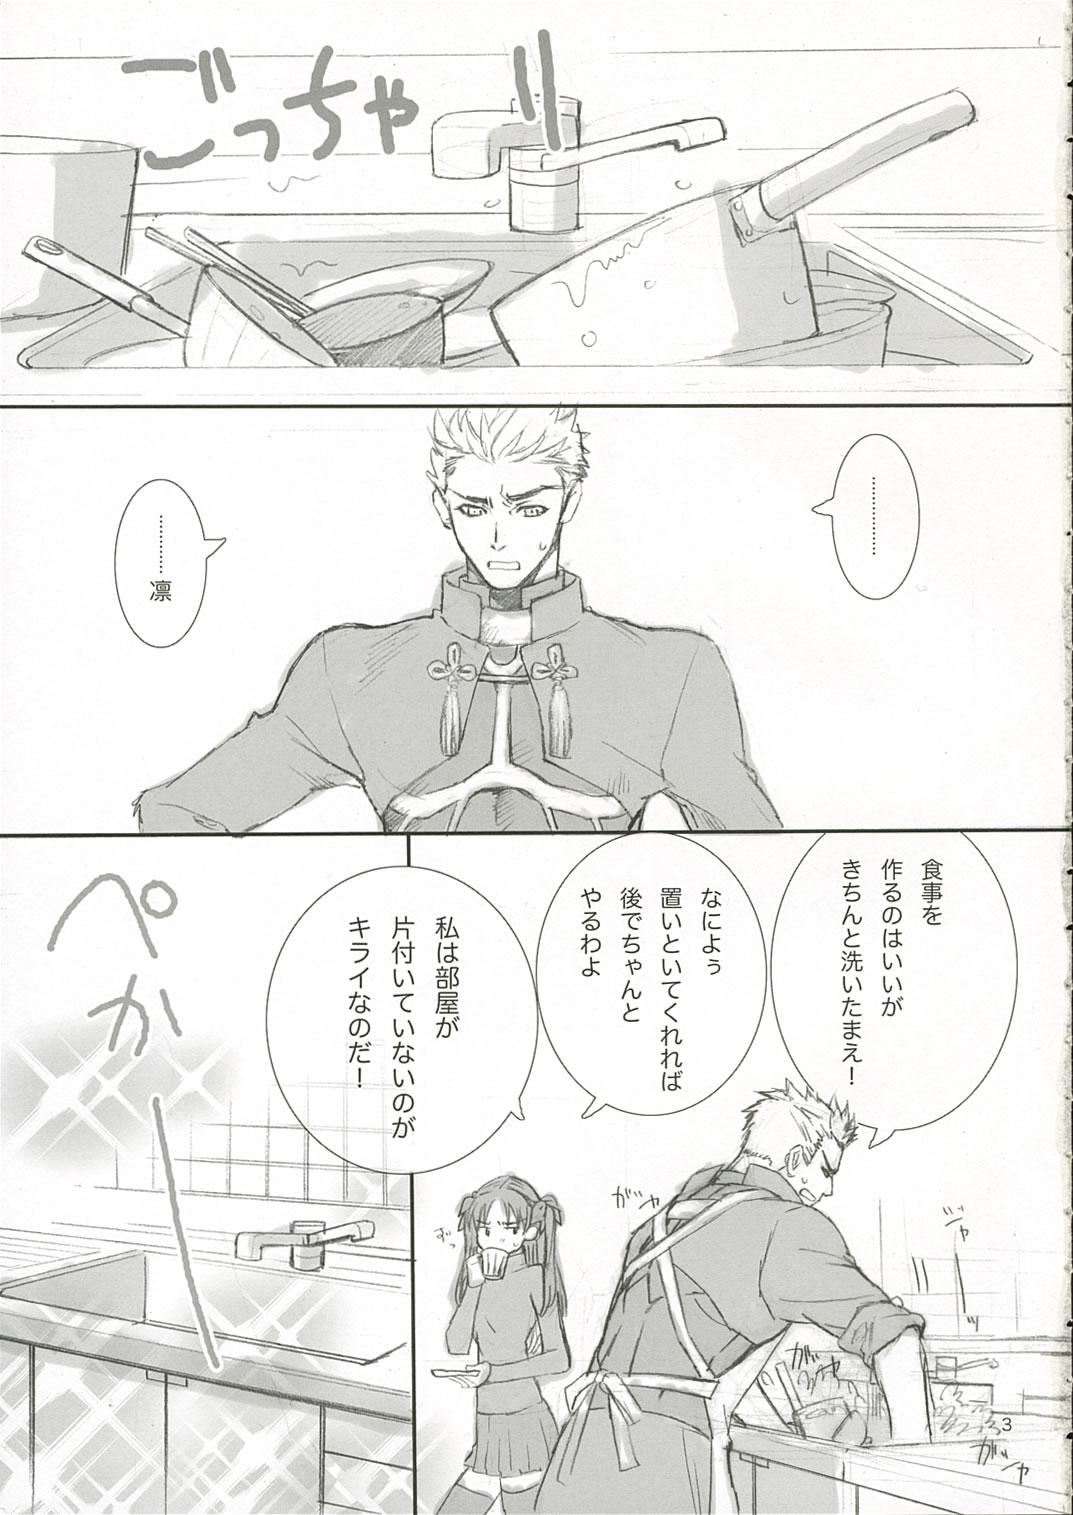 Banging Candy - Fate stay night Publico - Page 2